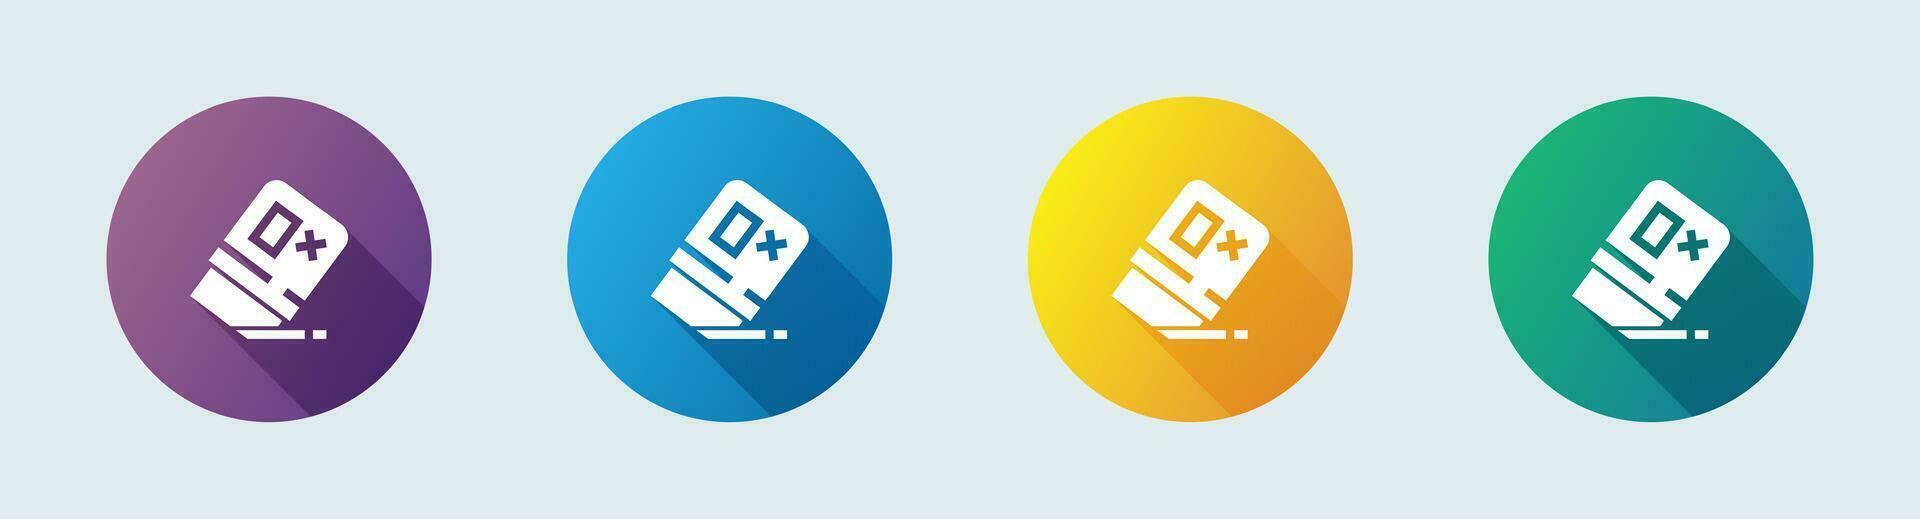 Eraser solid icon in flat design style. Wipe out signs vector illustration.